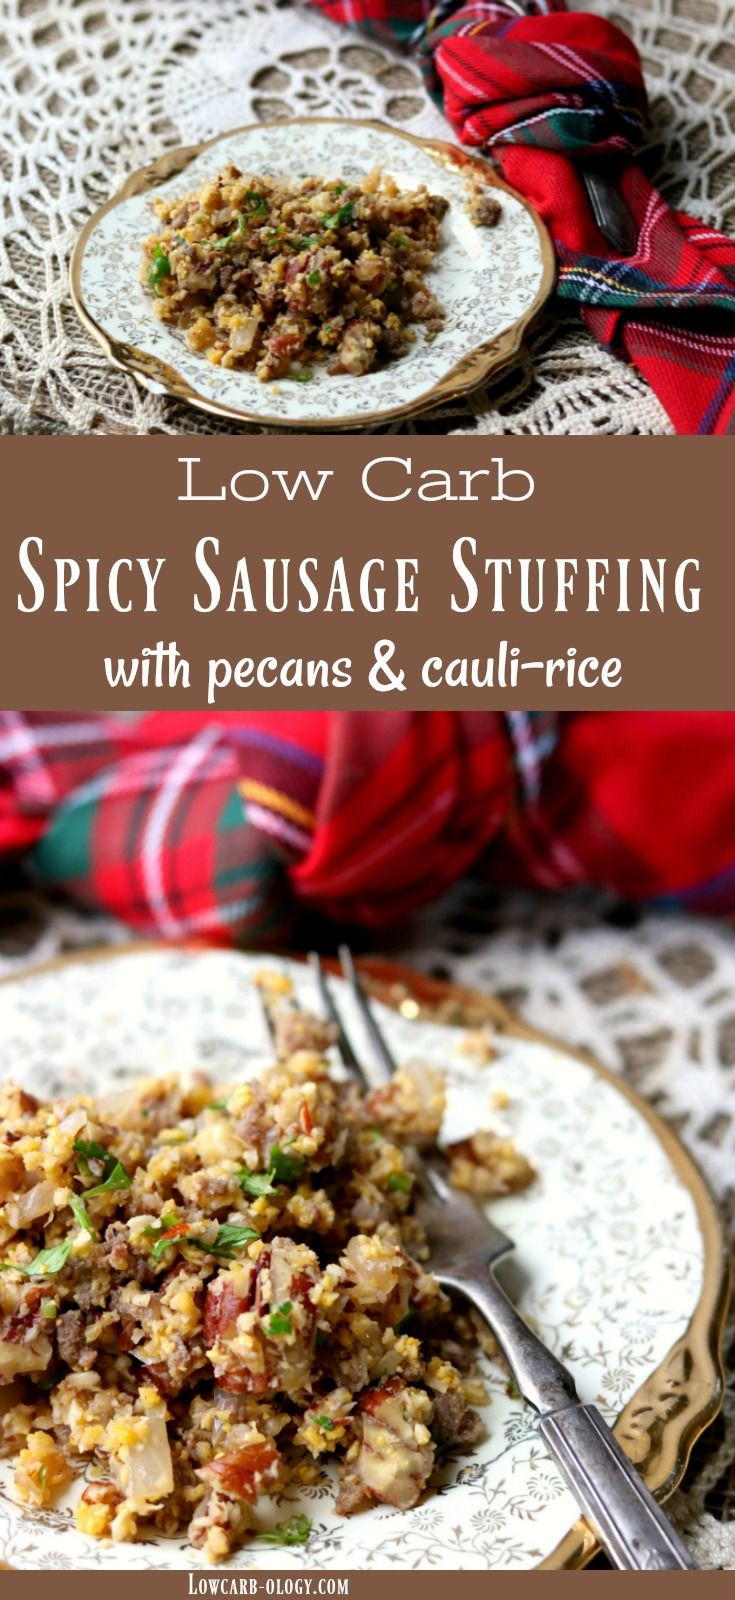 Low Carb Holiday Recipes
 Low Carb Stuffing Recipe Spicy Sausage and Pecan